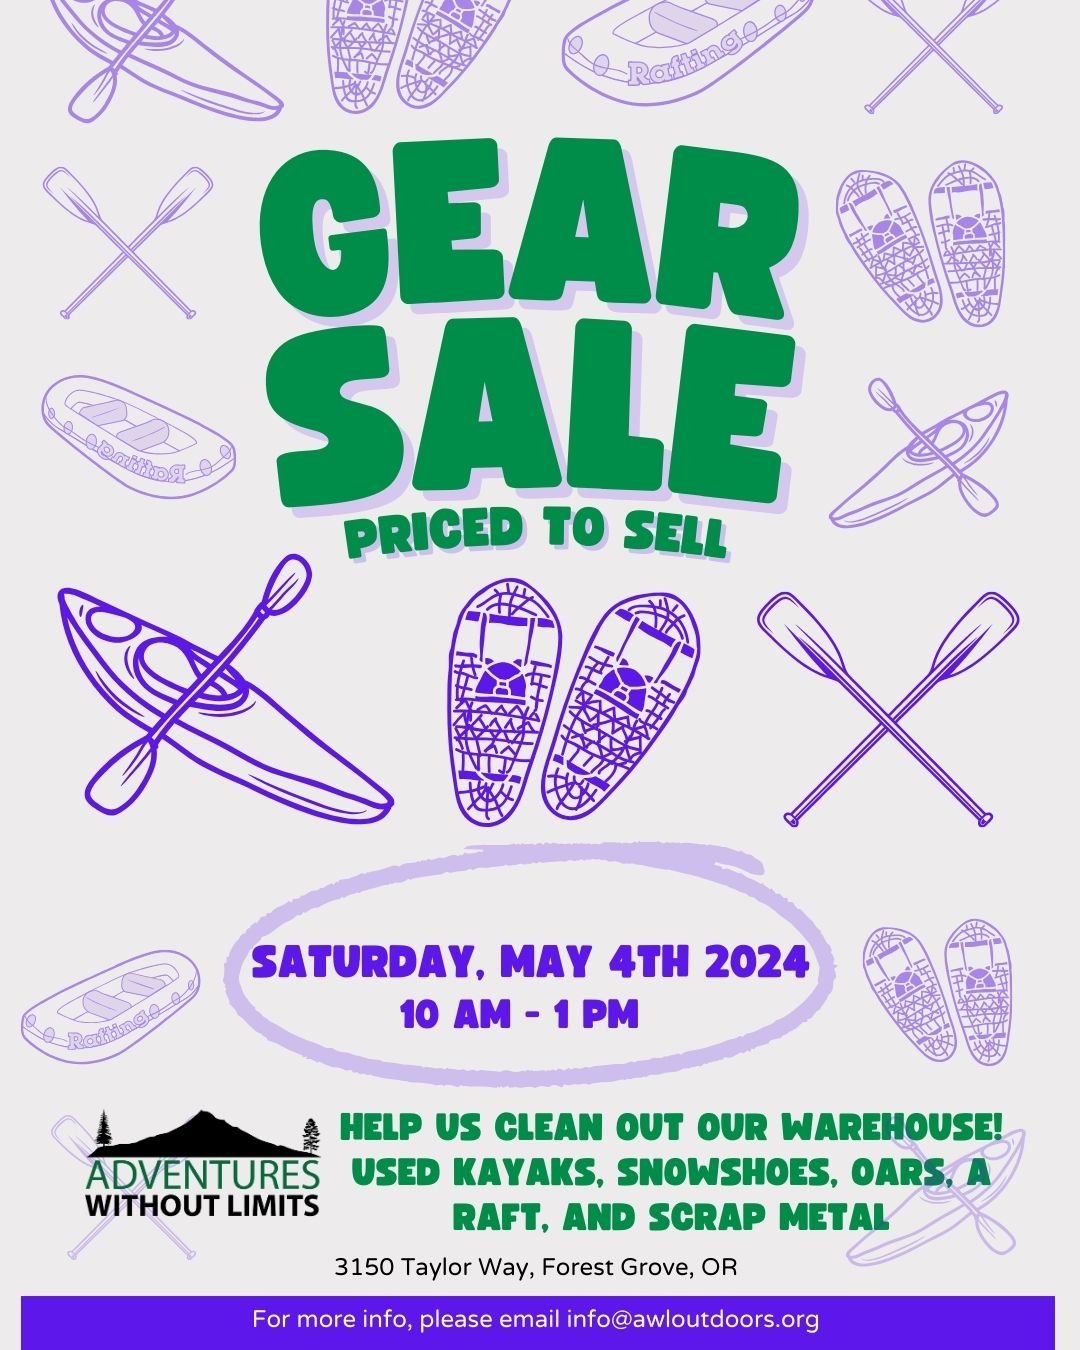 It's time for some spring cleaning! If you are interested in giving our used gear a second life, stop by our gear sale on Saturday, May 4th from 10 am - 1 pm.